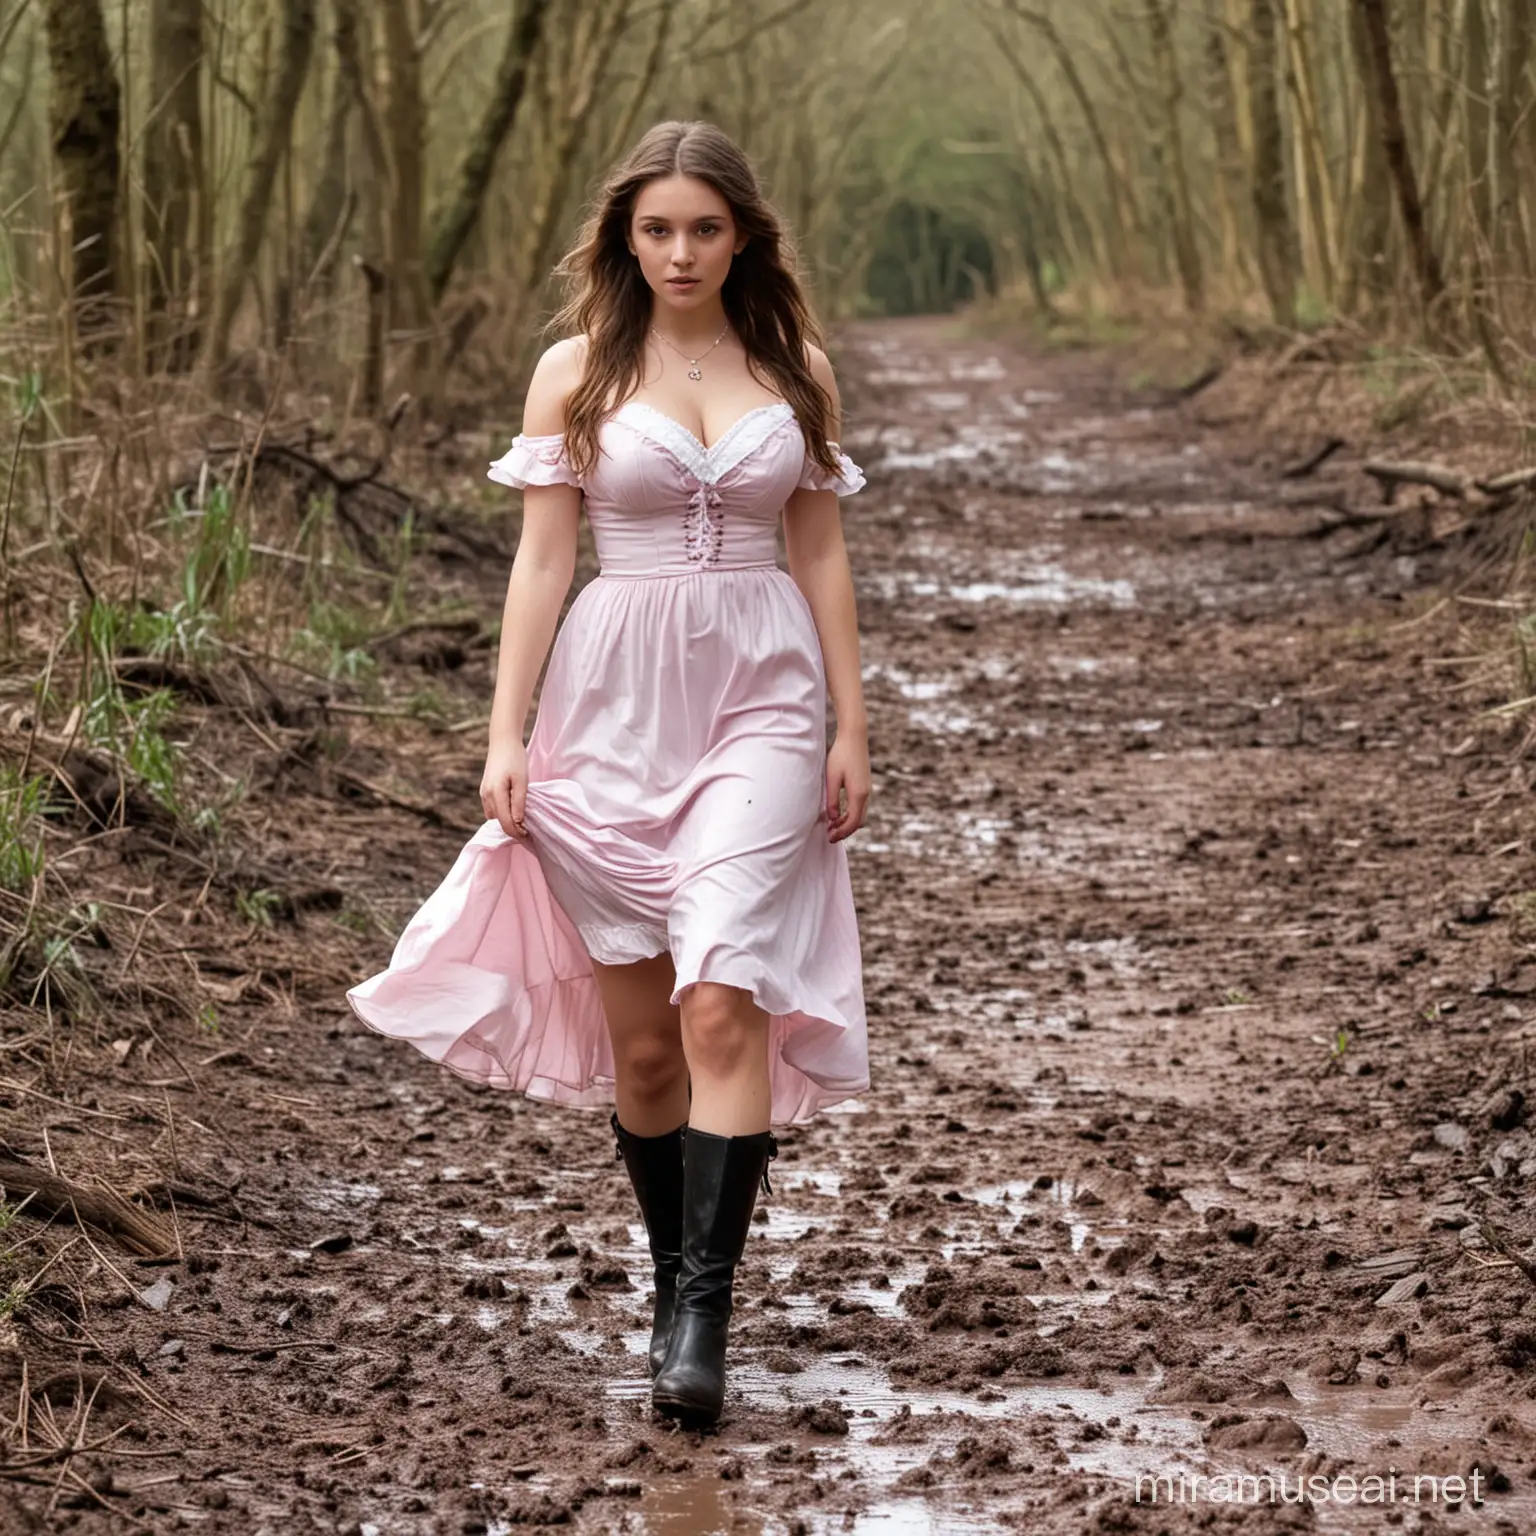 18 year old busty victorian girl in pink white  party dress black shoes walking in muddy wood
